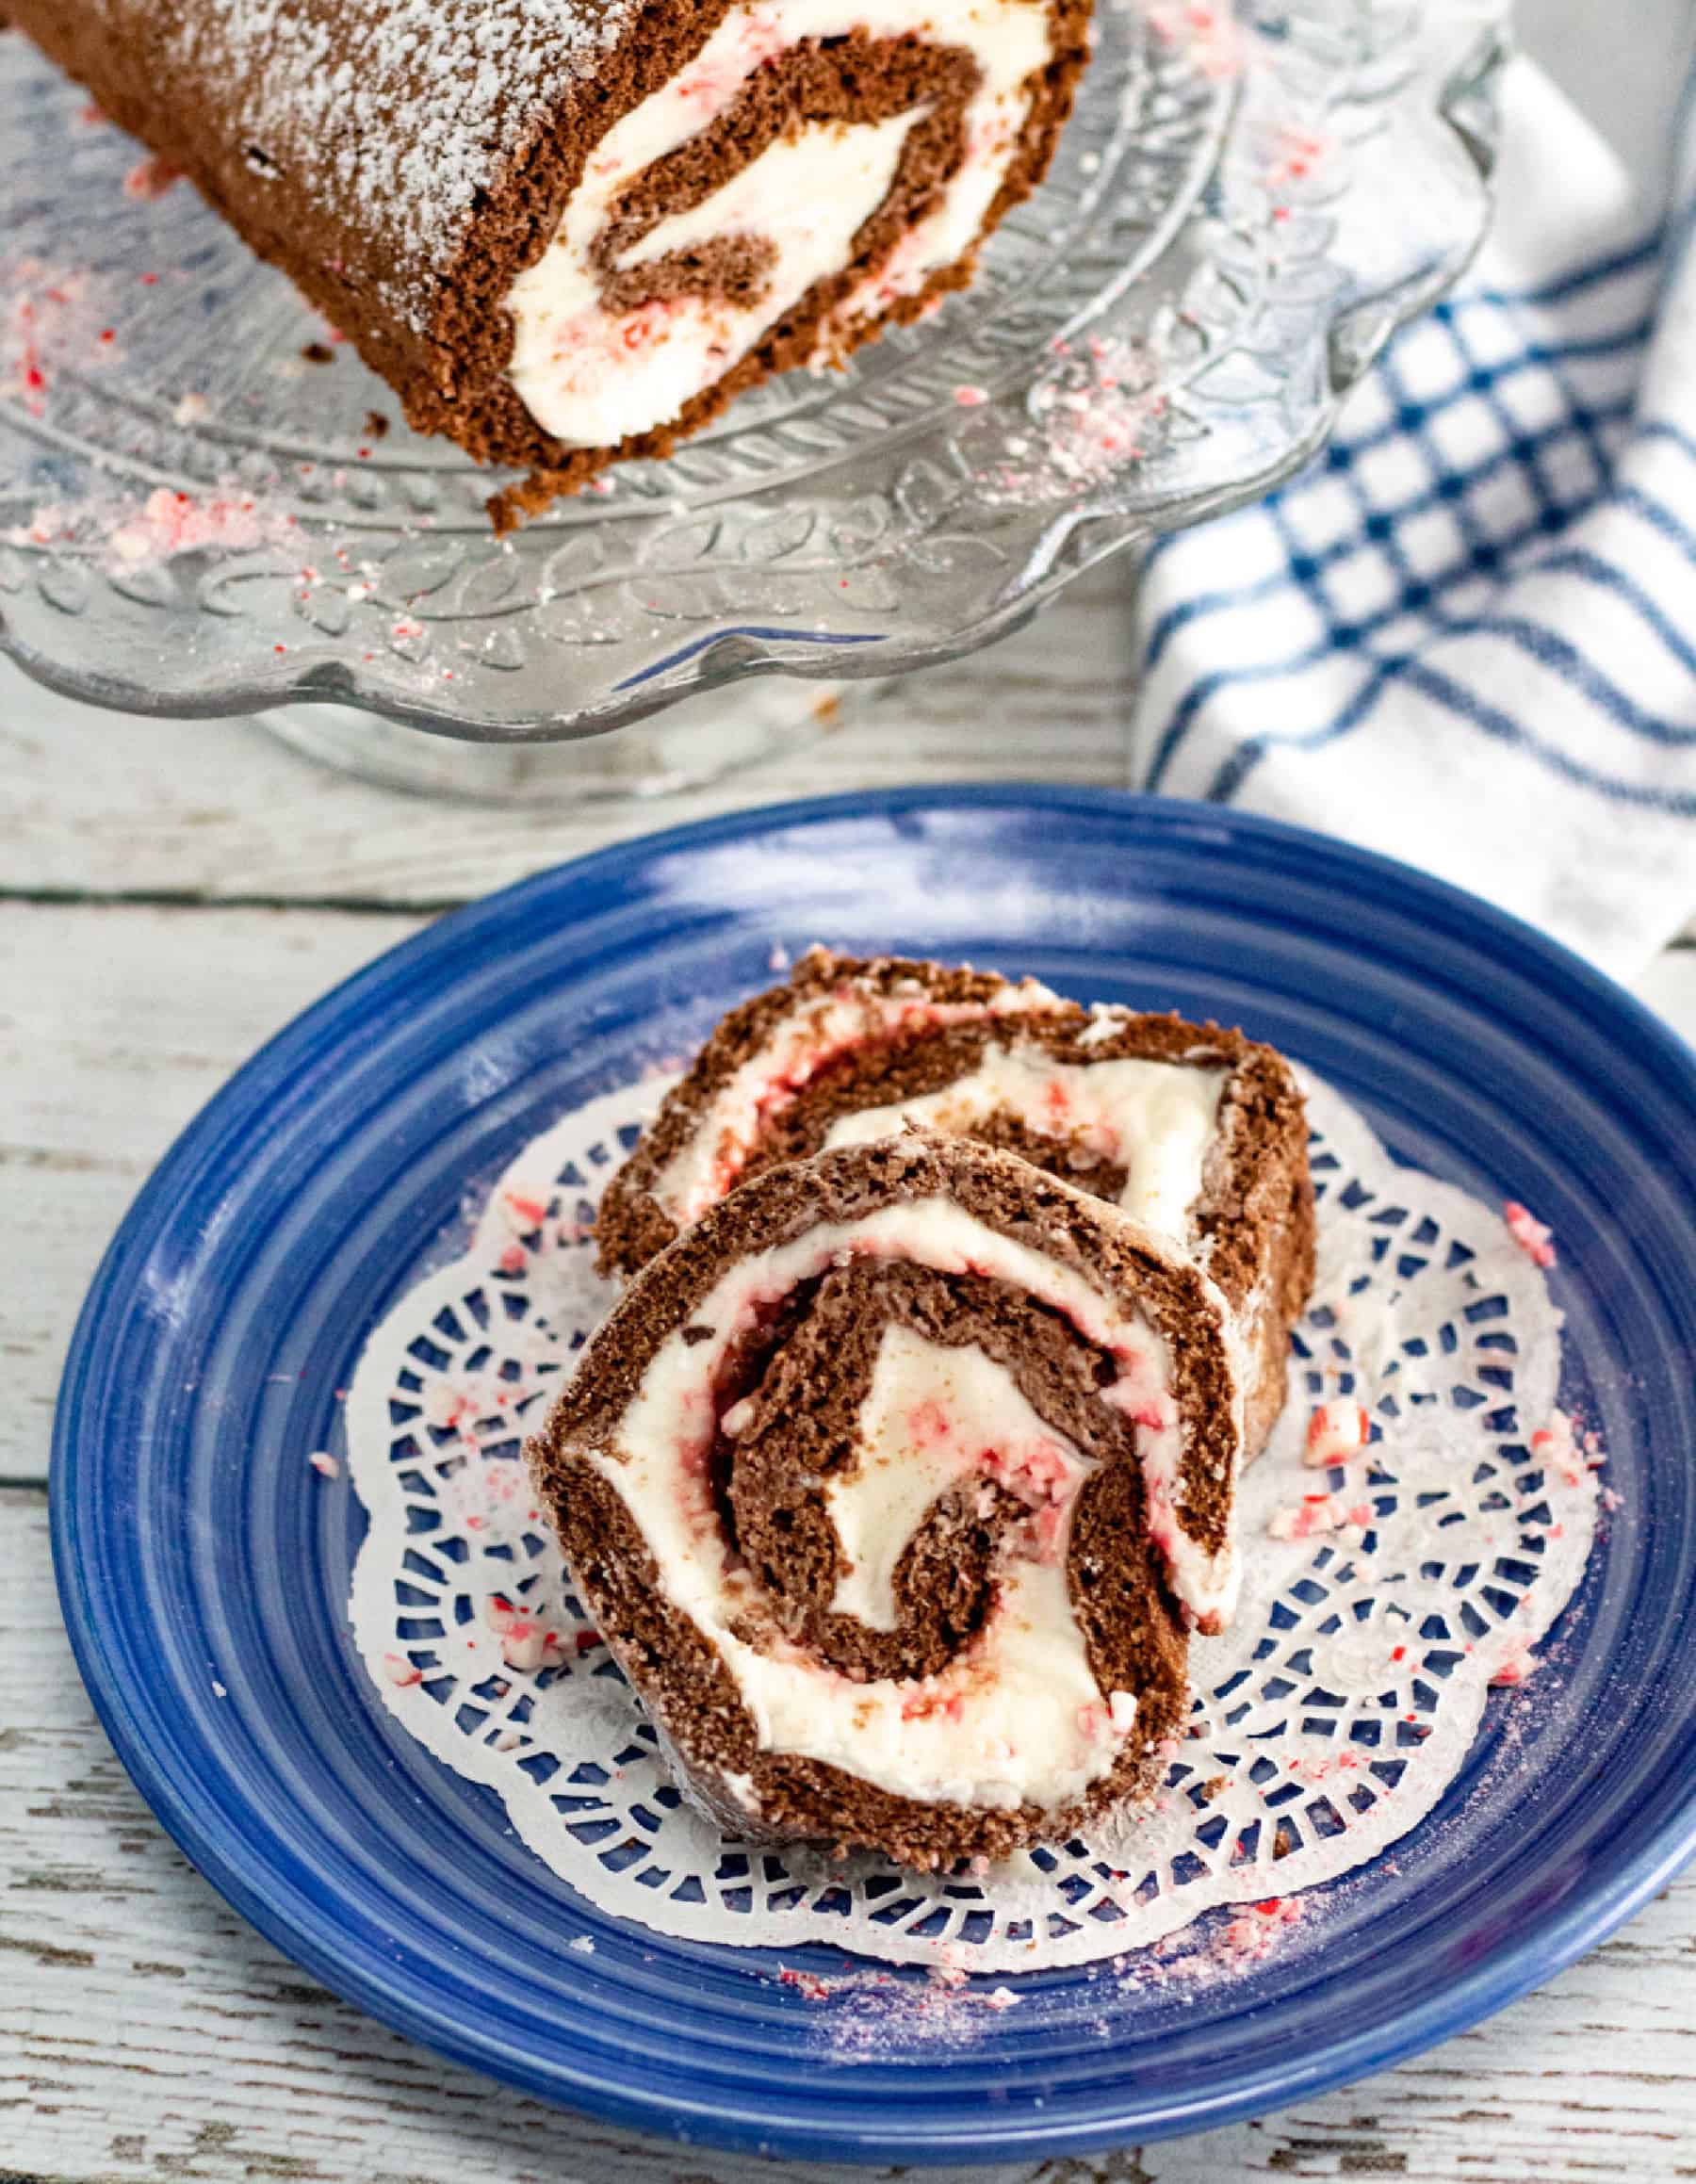 slices and roll of chocolate cake roll with peppermint cream filling